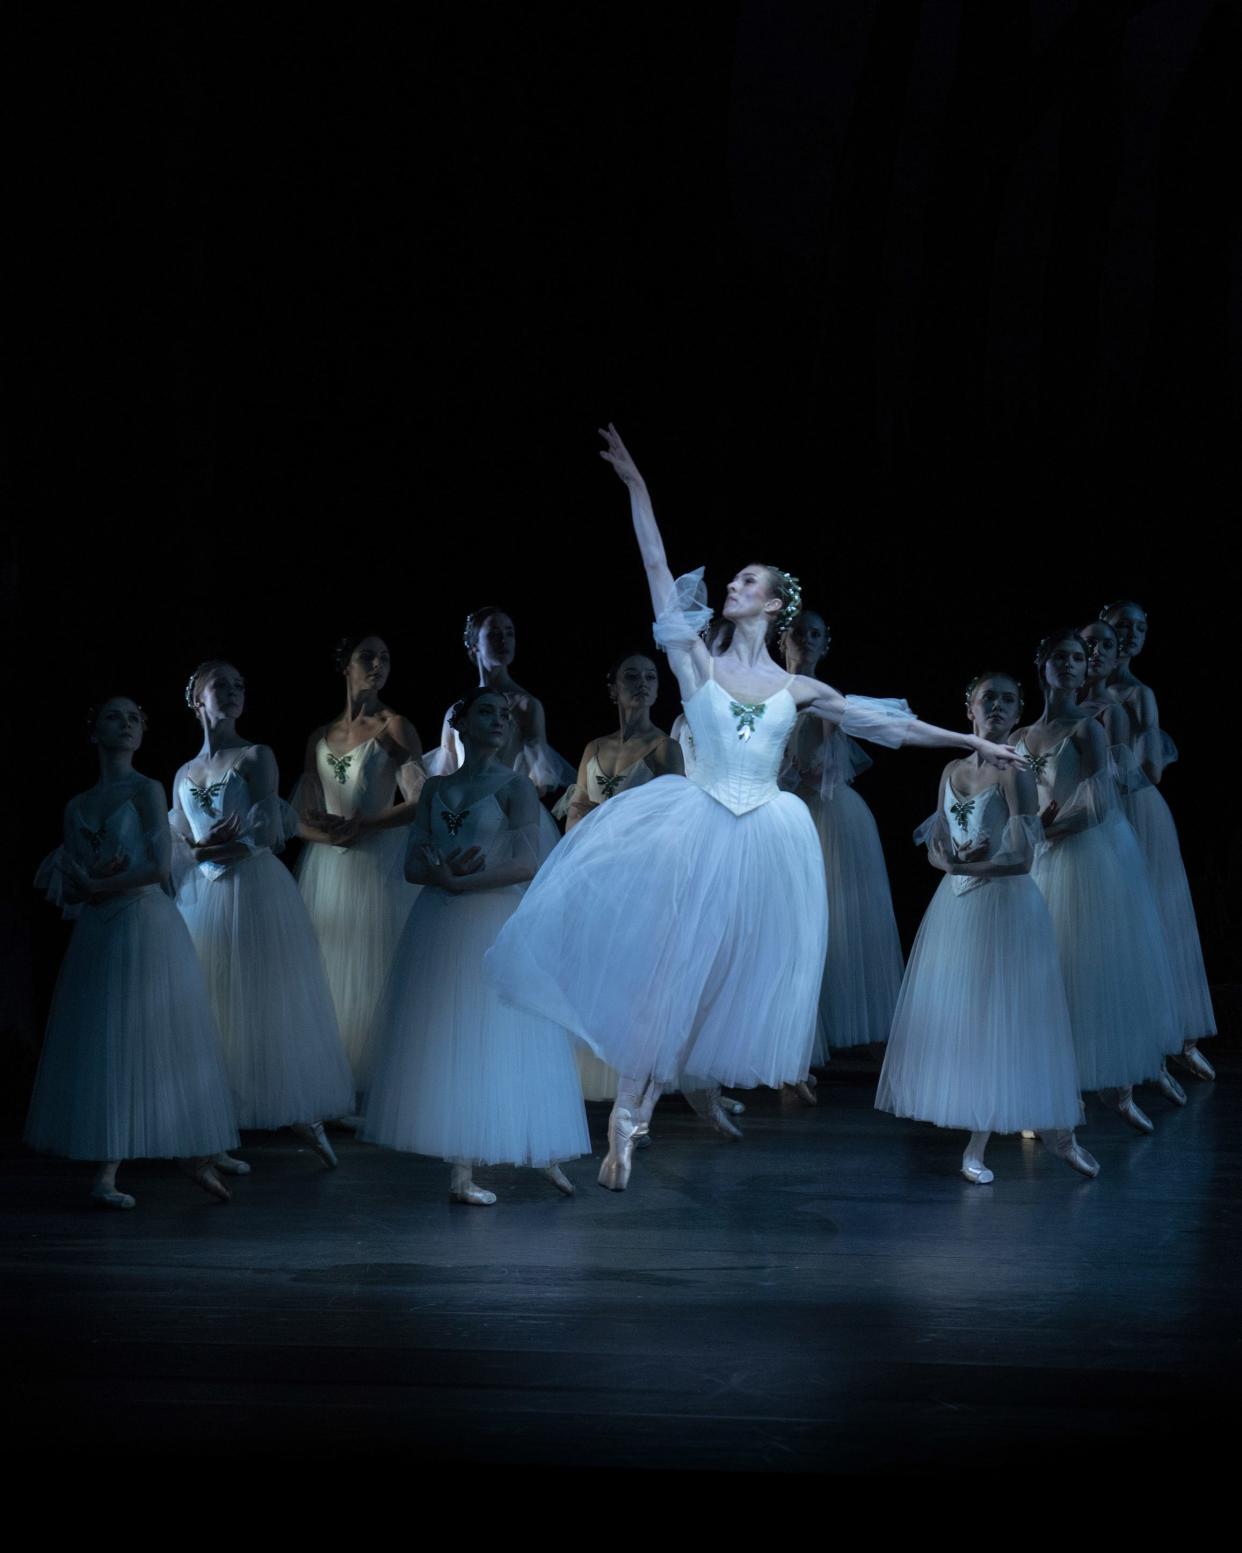 This production of "Giselle" stars Olga Smirnova and Jacopo Tissi, both former stars of the Bolshoi Ballet, and screens at Regal Governors Square on Jan. 21, 2024.